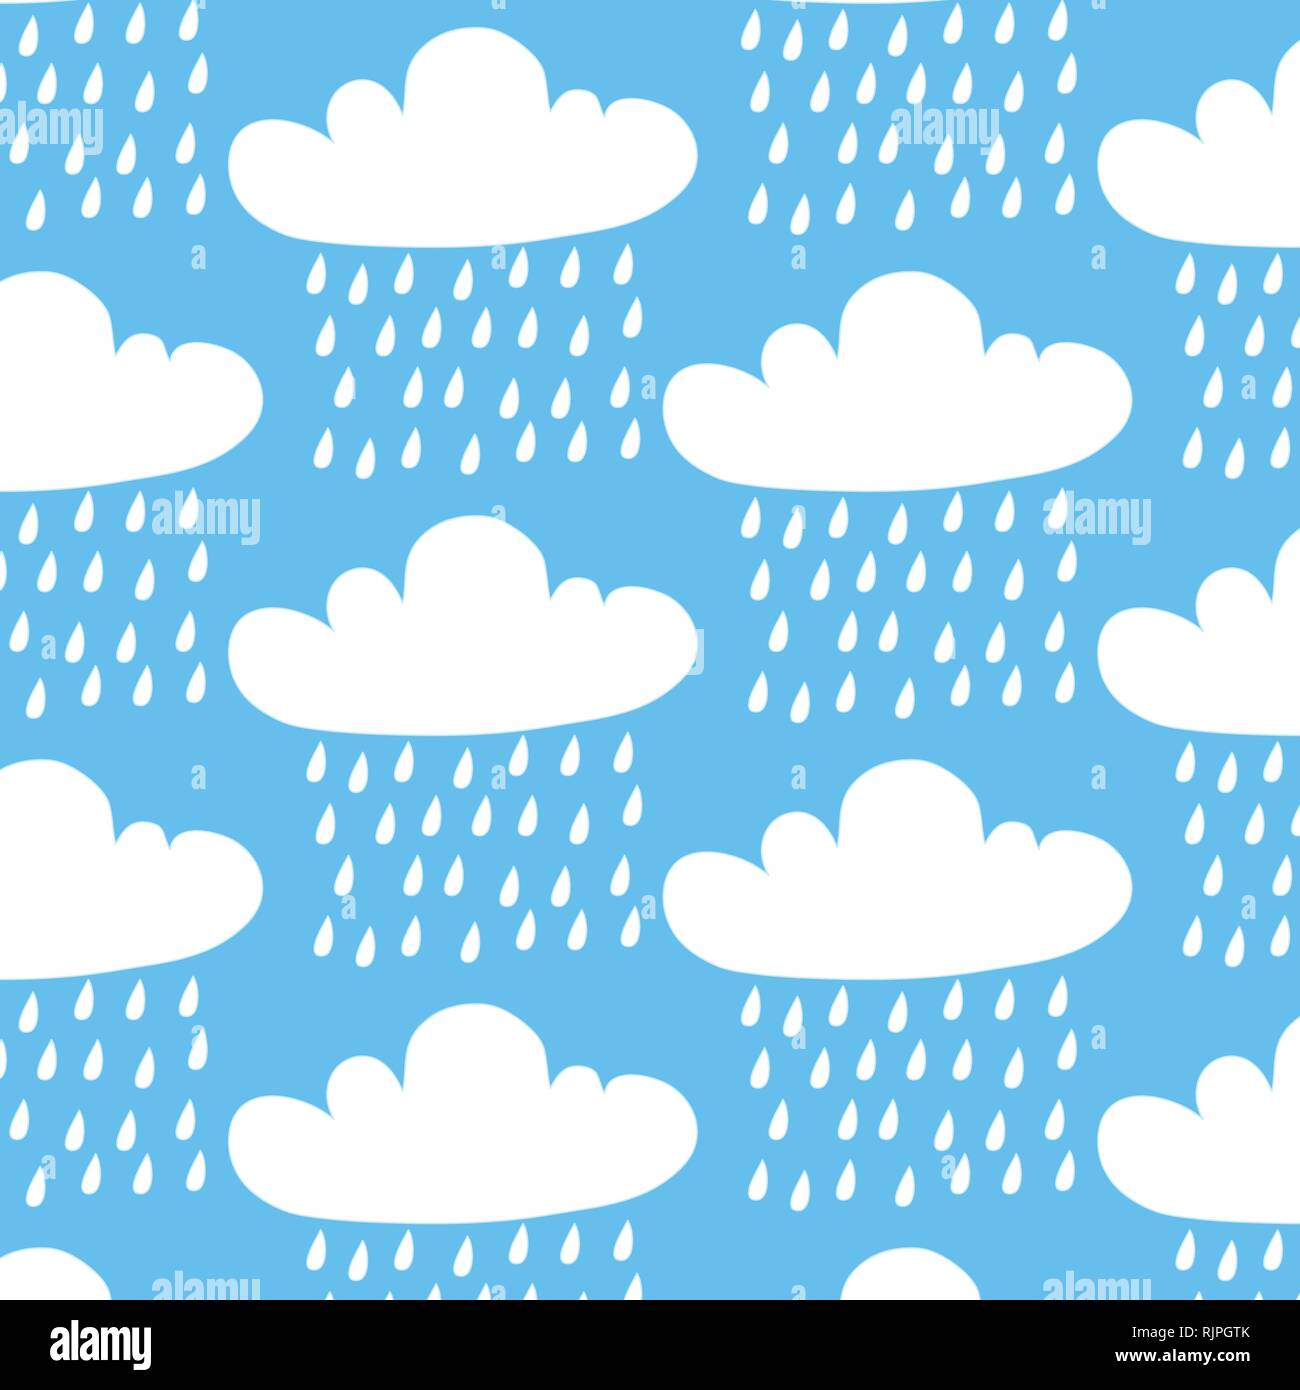 Clouds and rain vector pattern Stock Vector